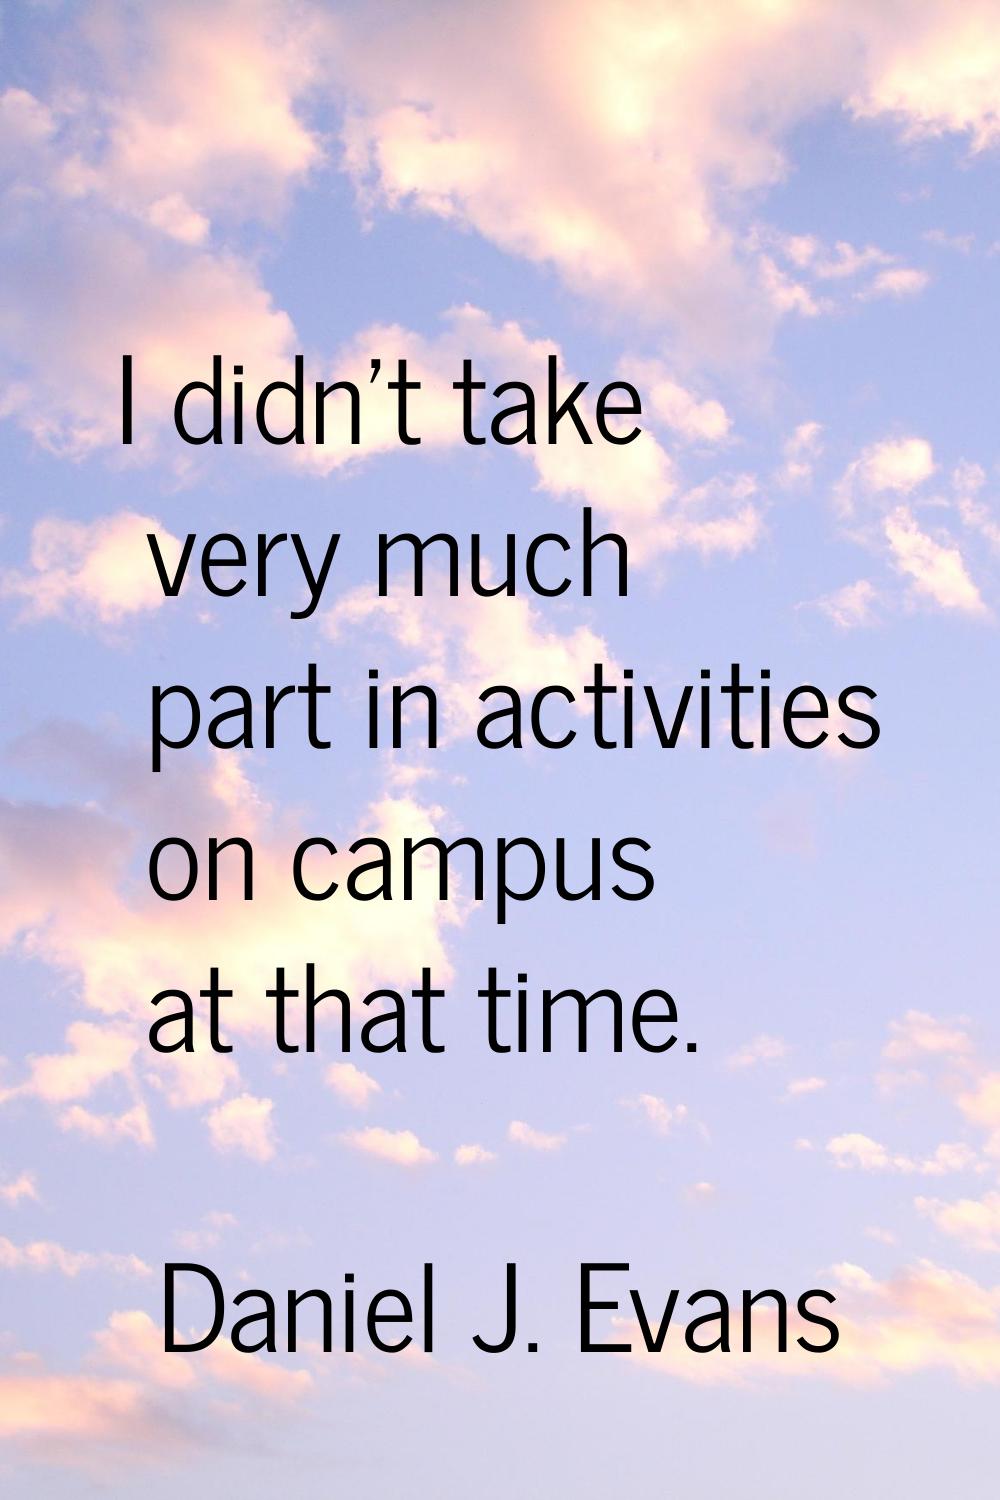 I didn't take very much part in activities on campus at that time.